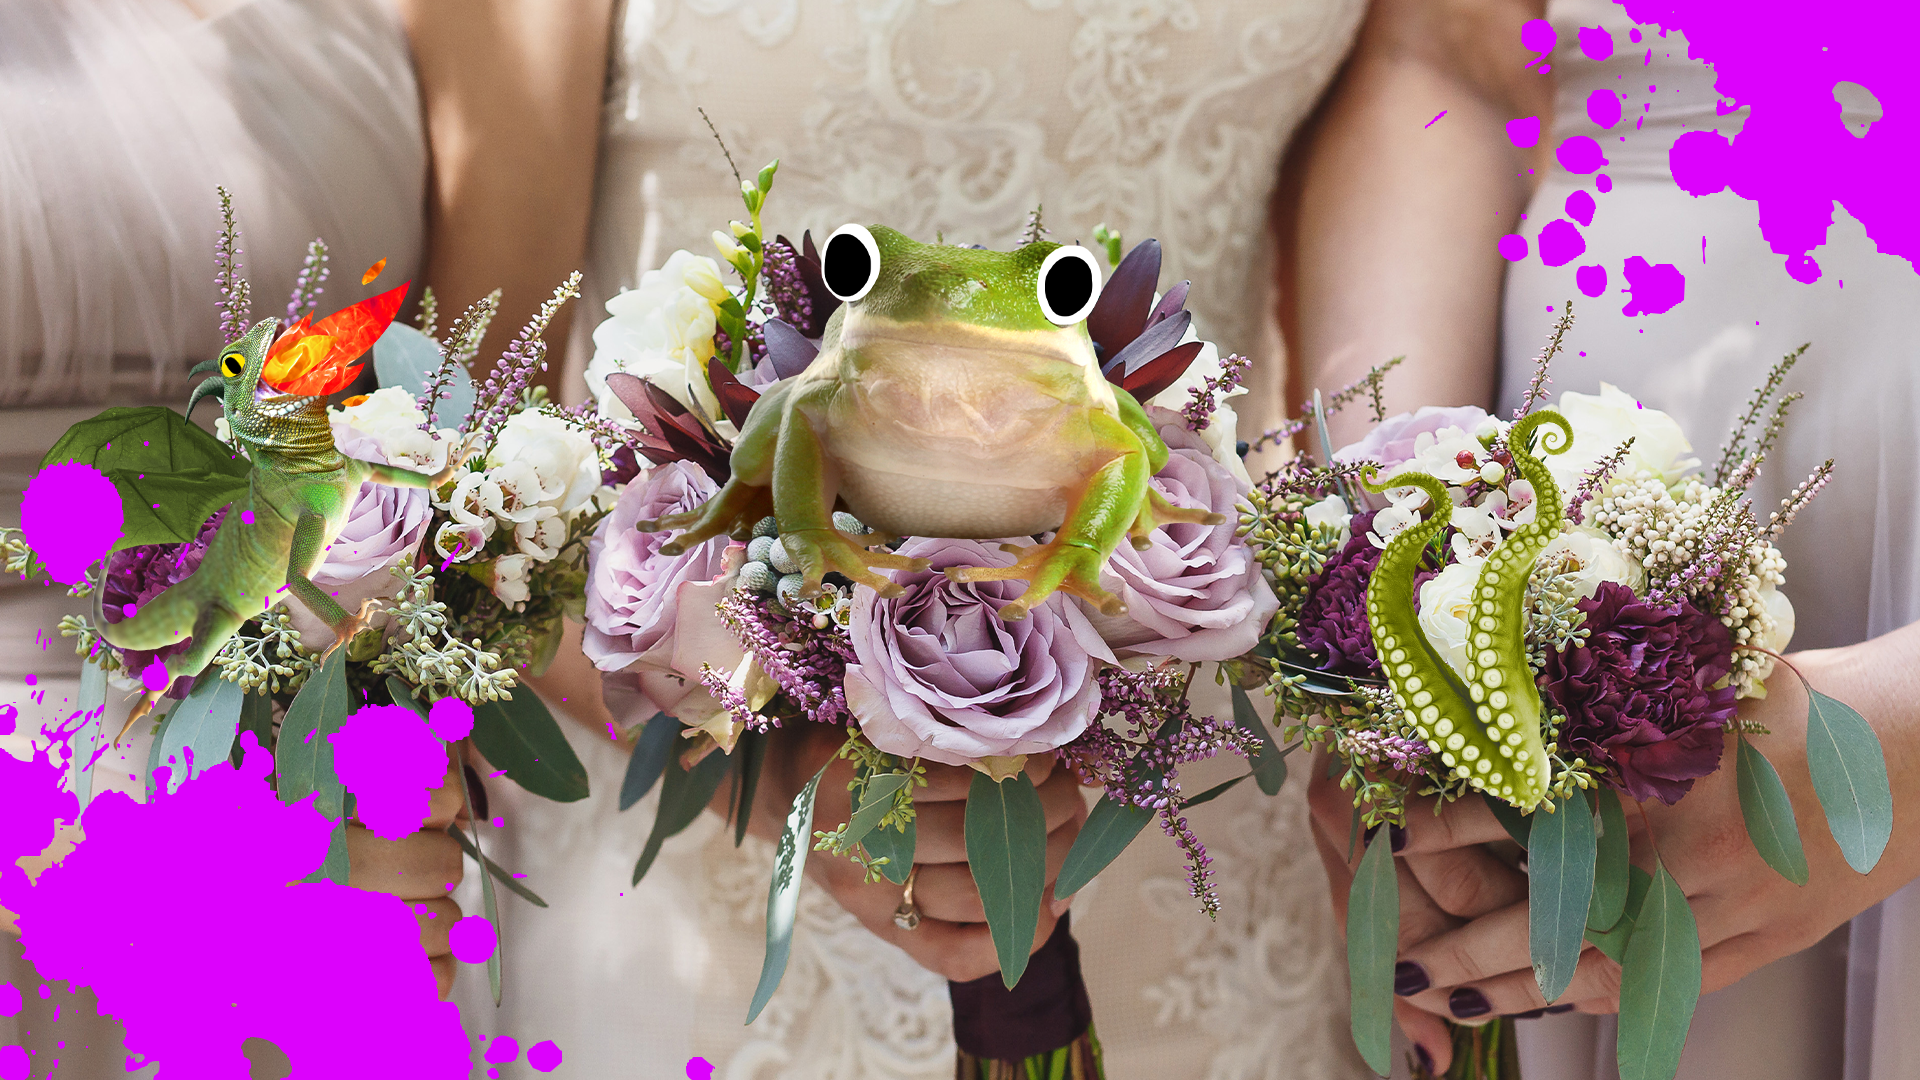 Bridesmaid's bouquets with witchy things in them and purple splats